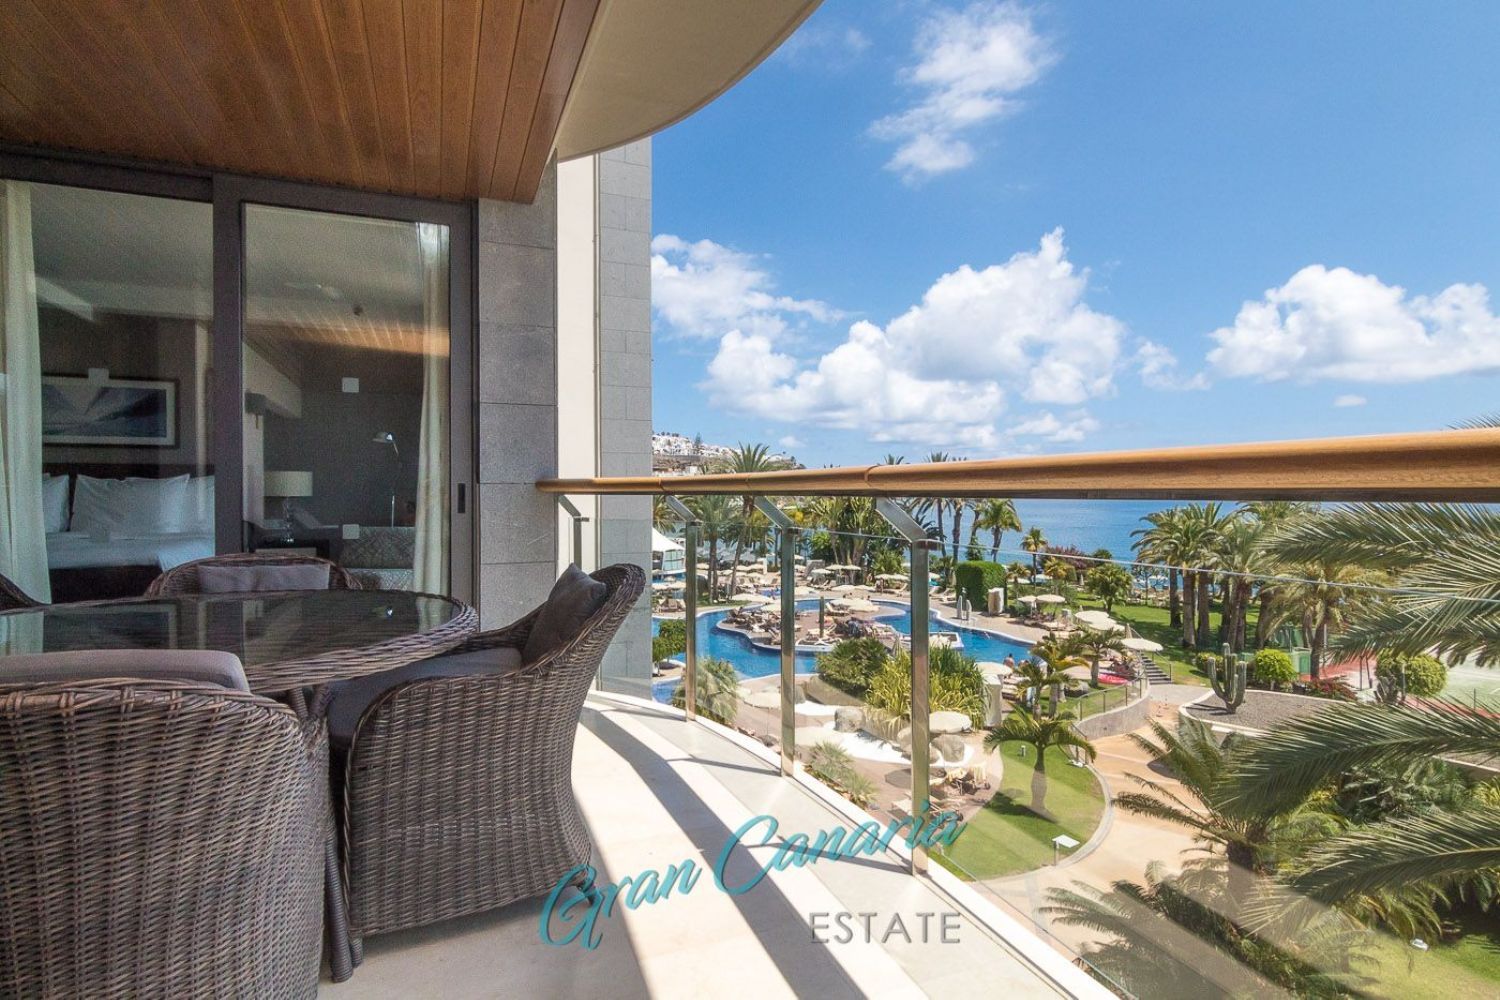 Flat for sale in first sea line in Aguasmarinas, Mogán